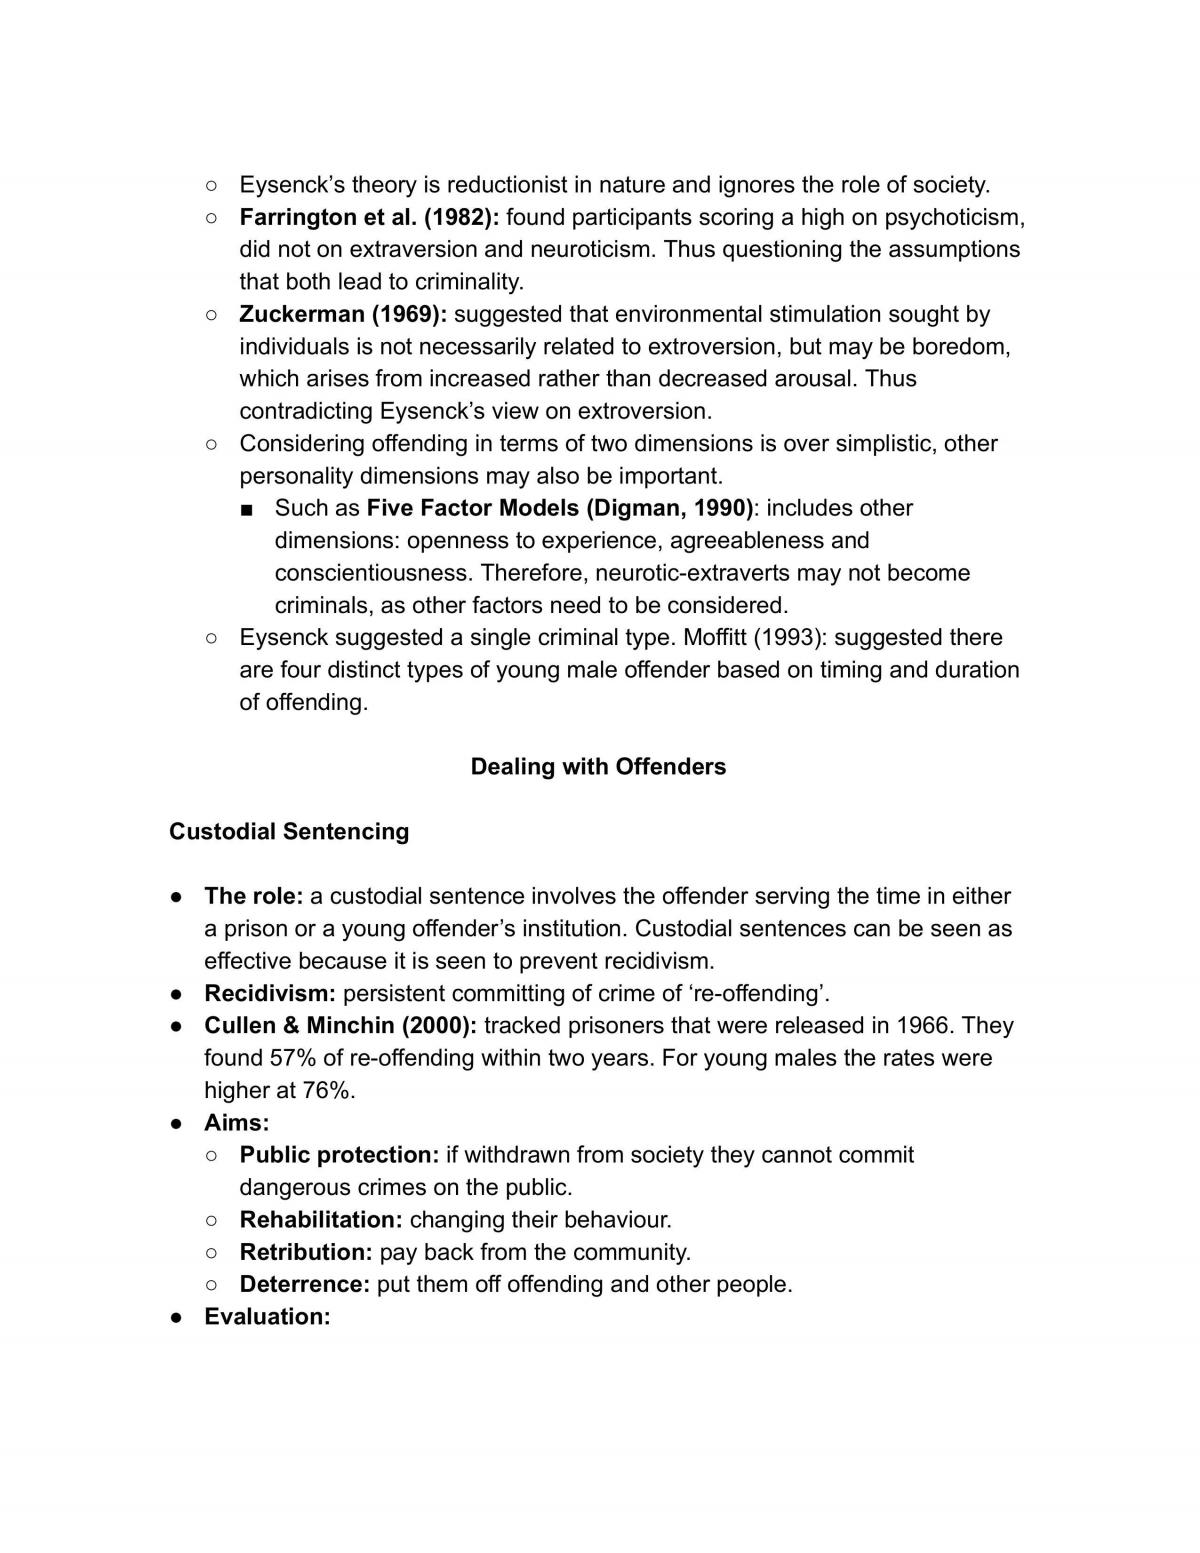 PSYC232 Forensic Psychology Revision Notes - Page 16